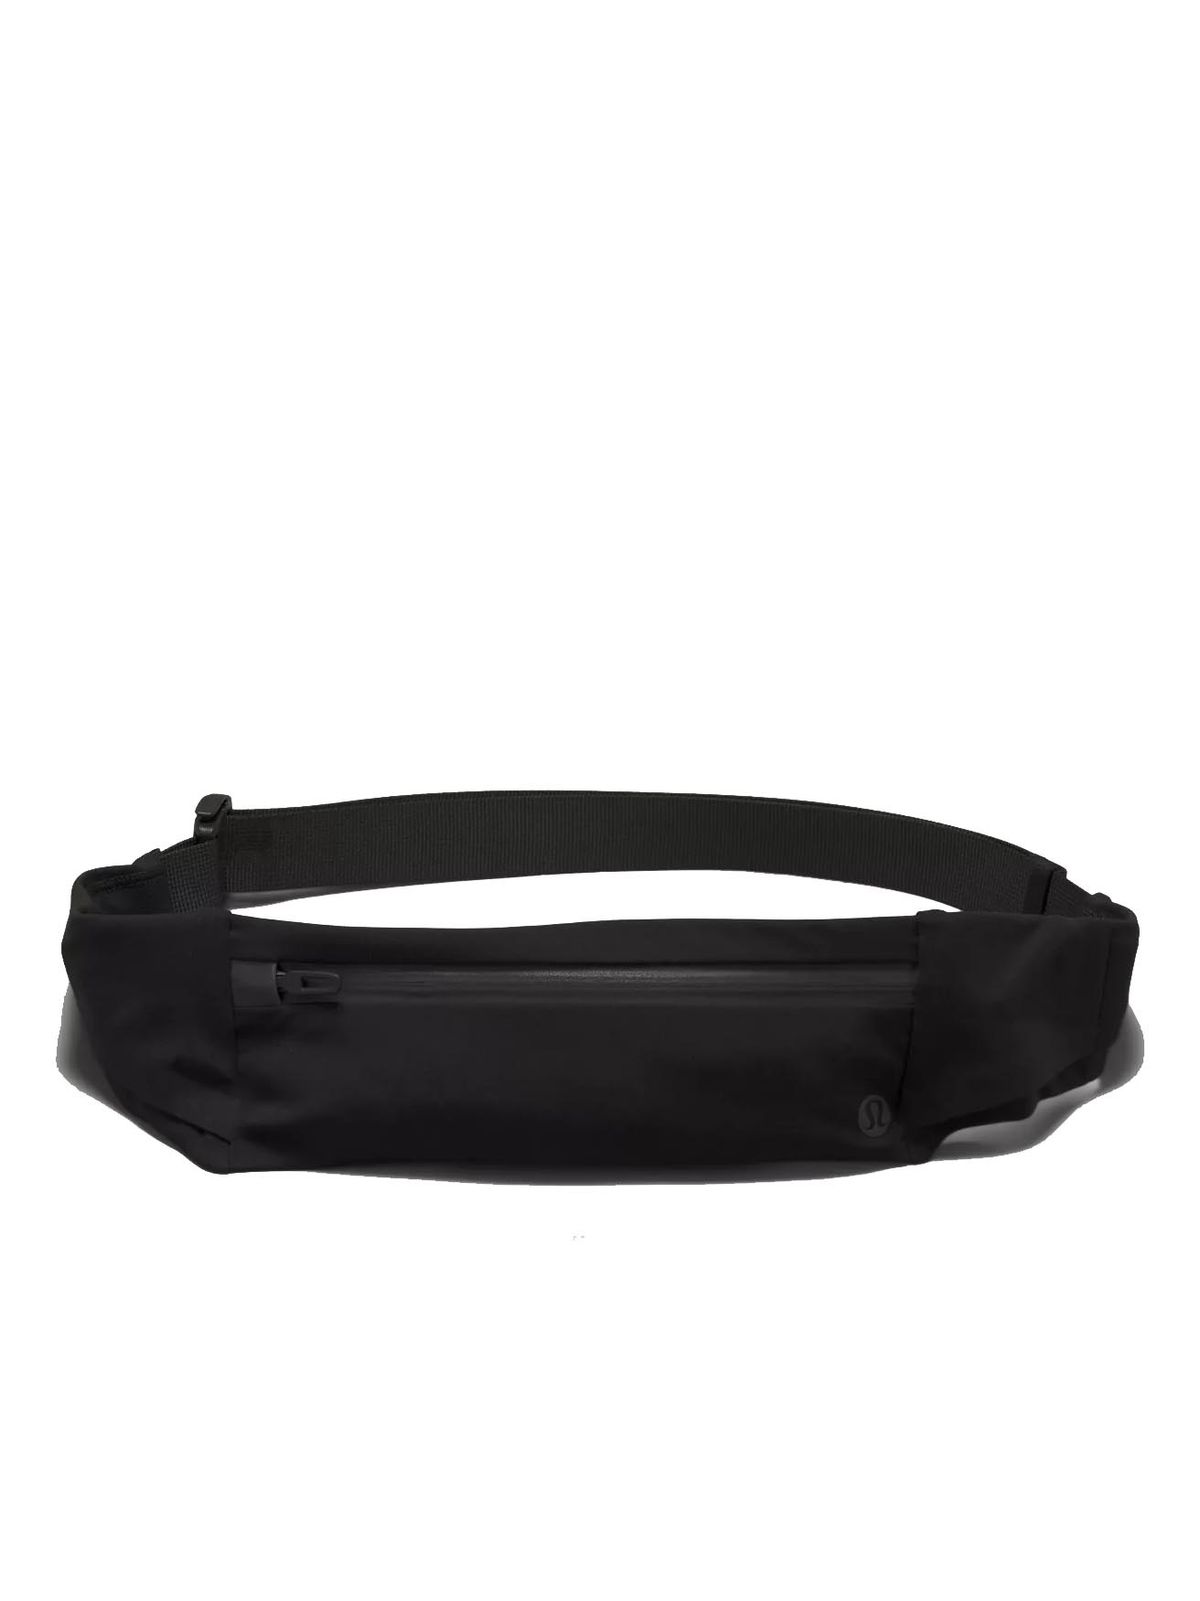 The best running belts | Tom's Guide